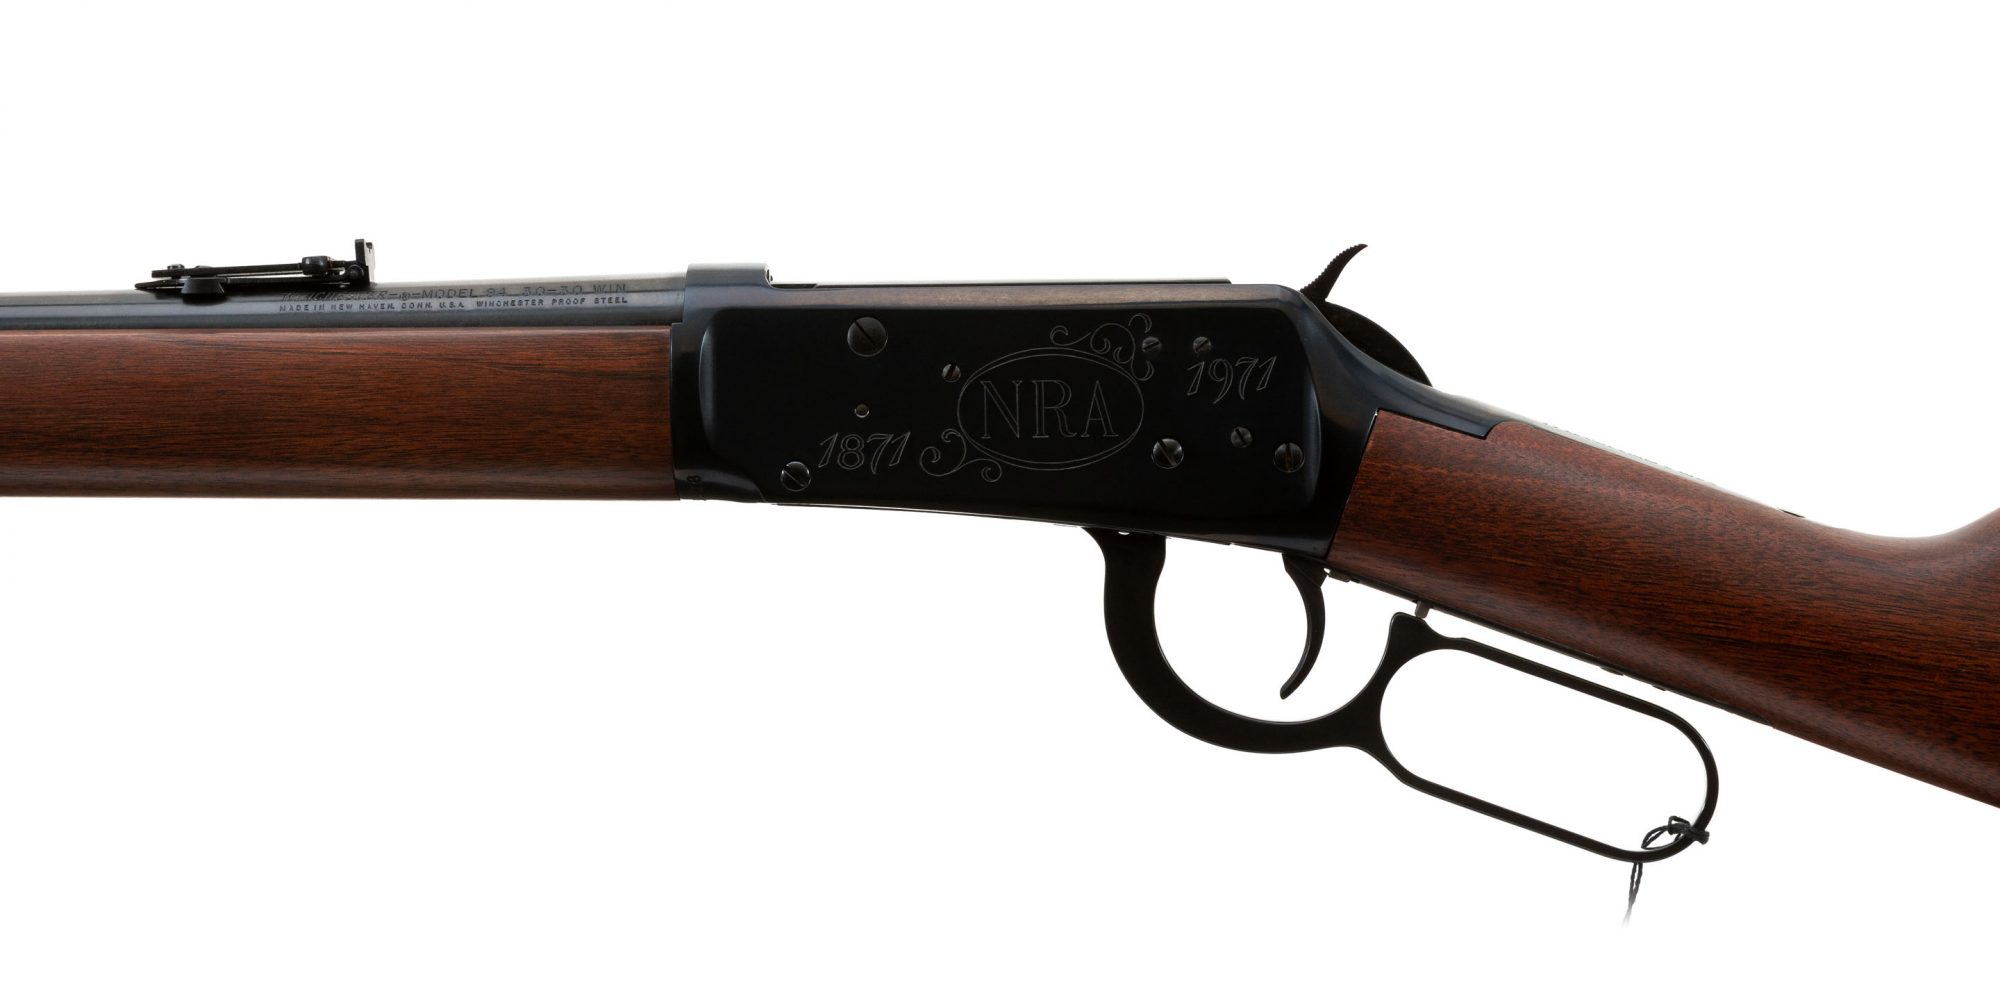 Photo of a Winchester Model 94 NRA Centennial Musket, for sale by Turnbull Restoration of Bloomfield, NY